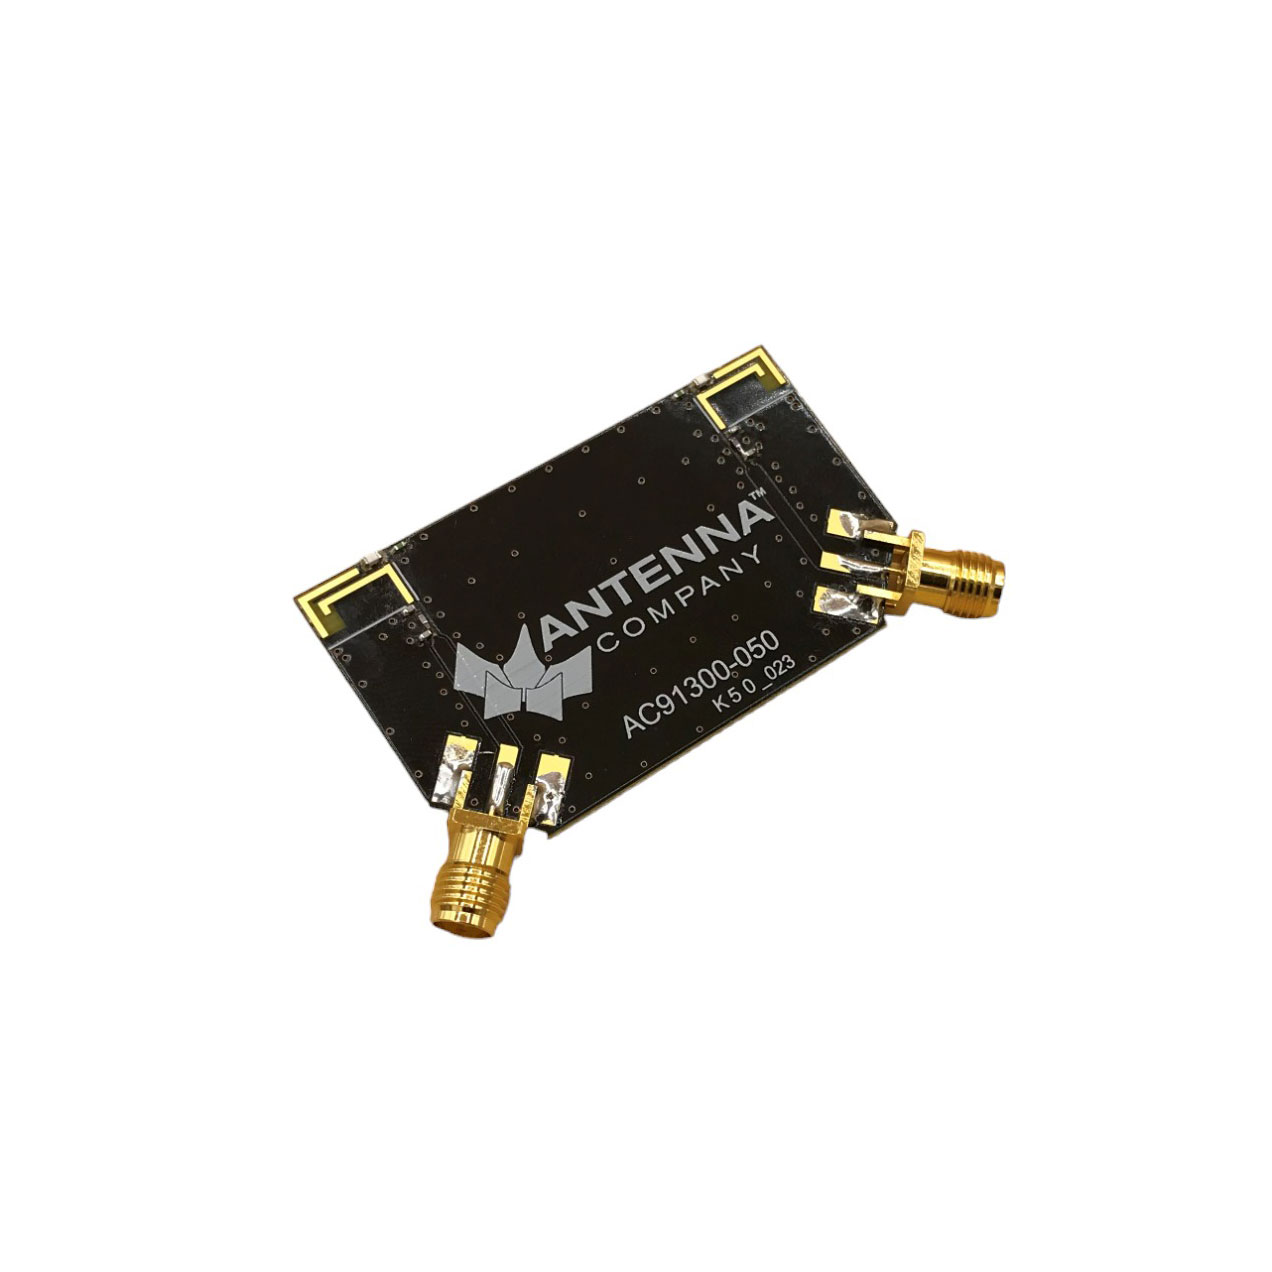 【AC91300-050】EVAL. KIT TRIBAND WIFI SMD ANT.